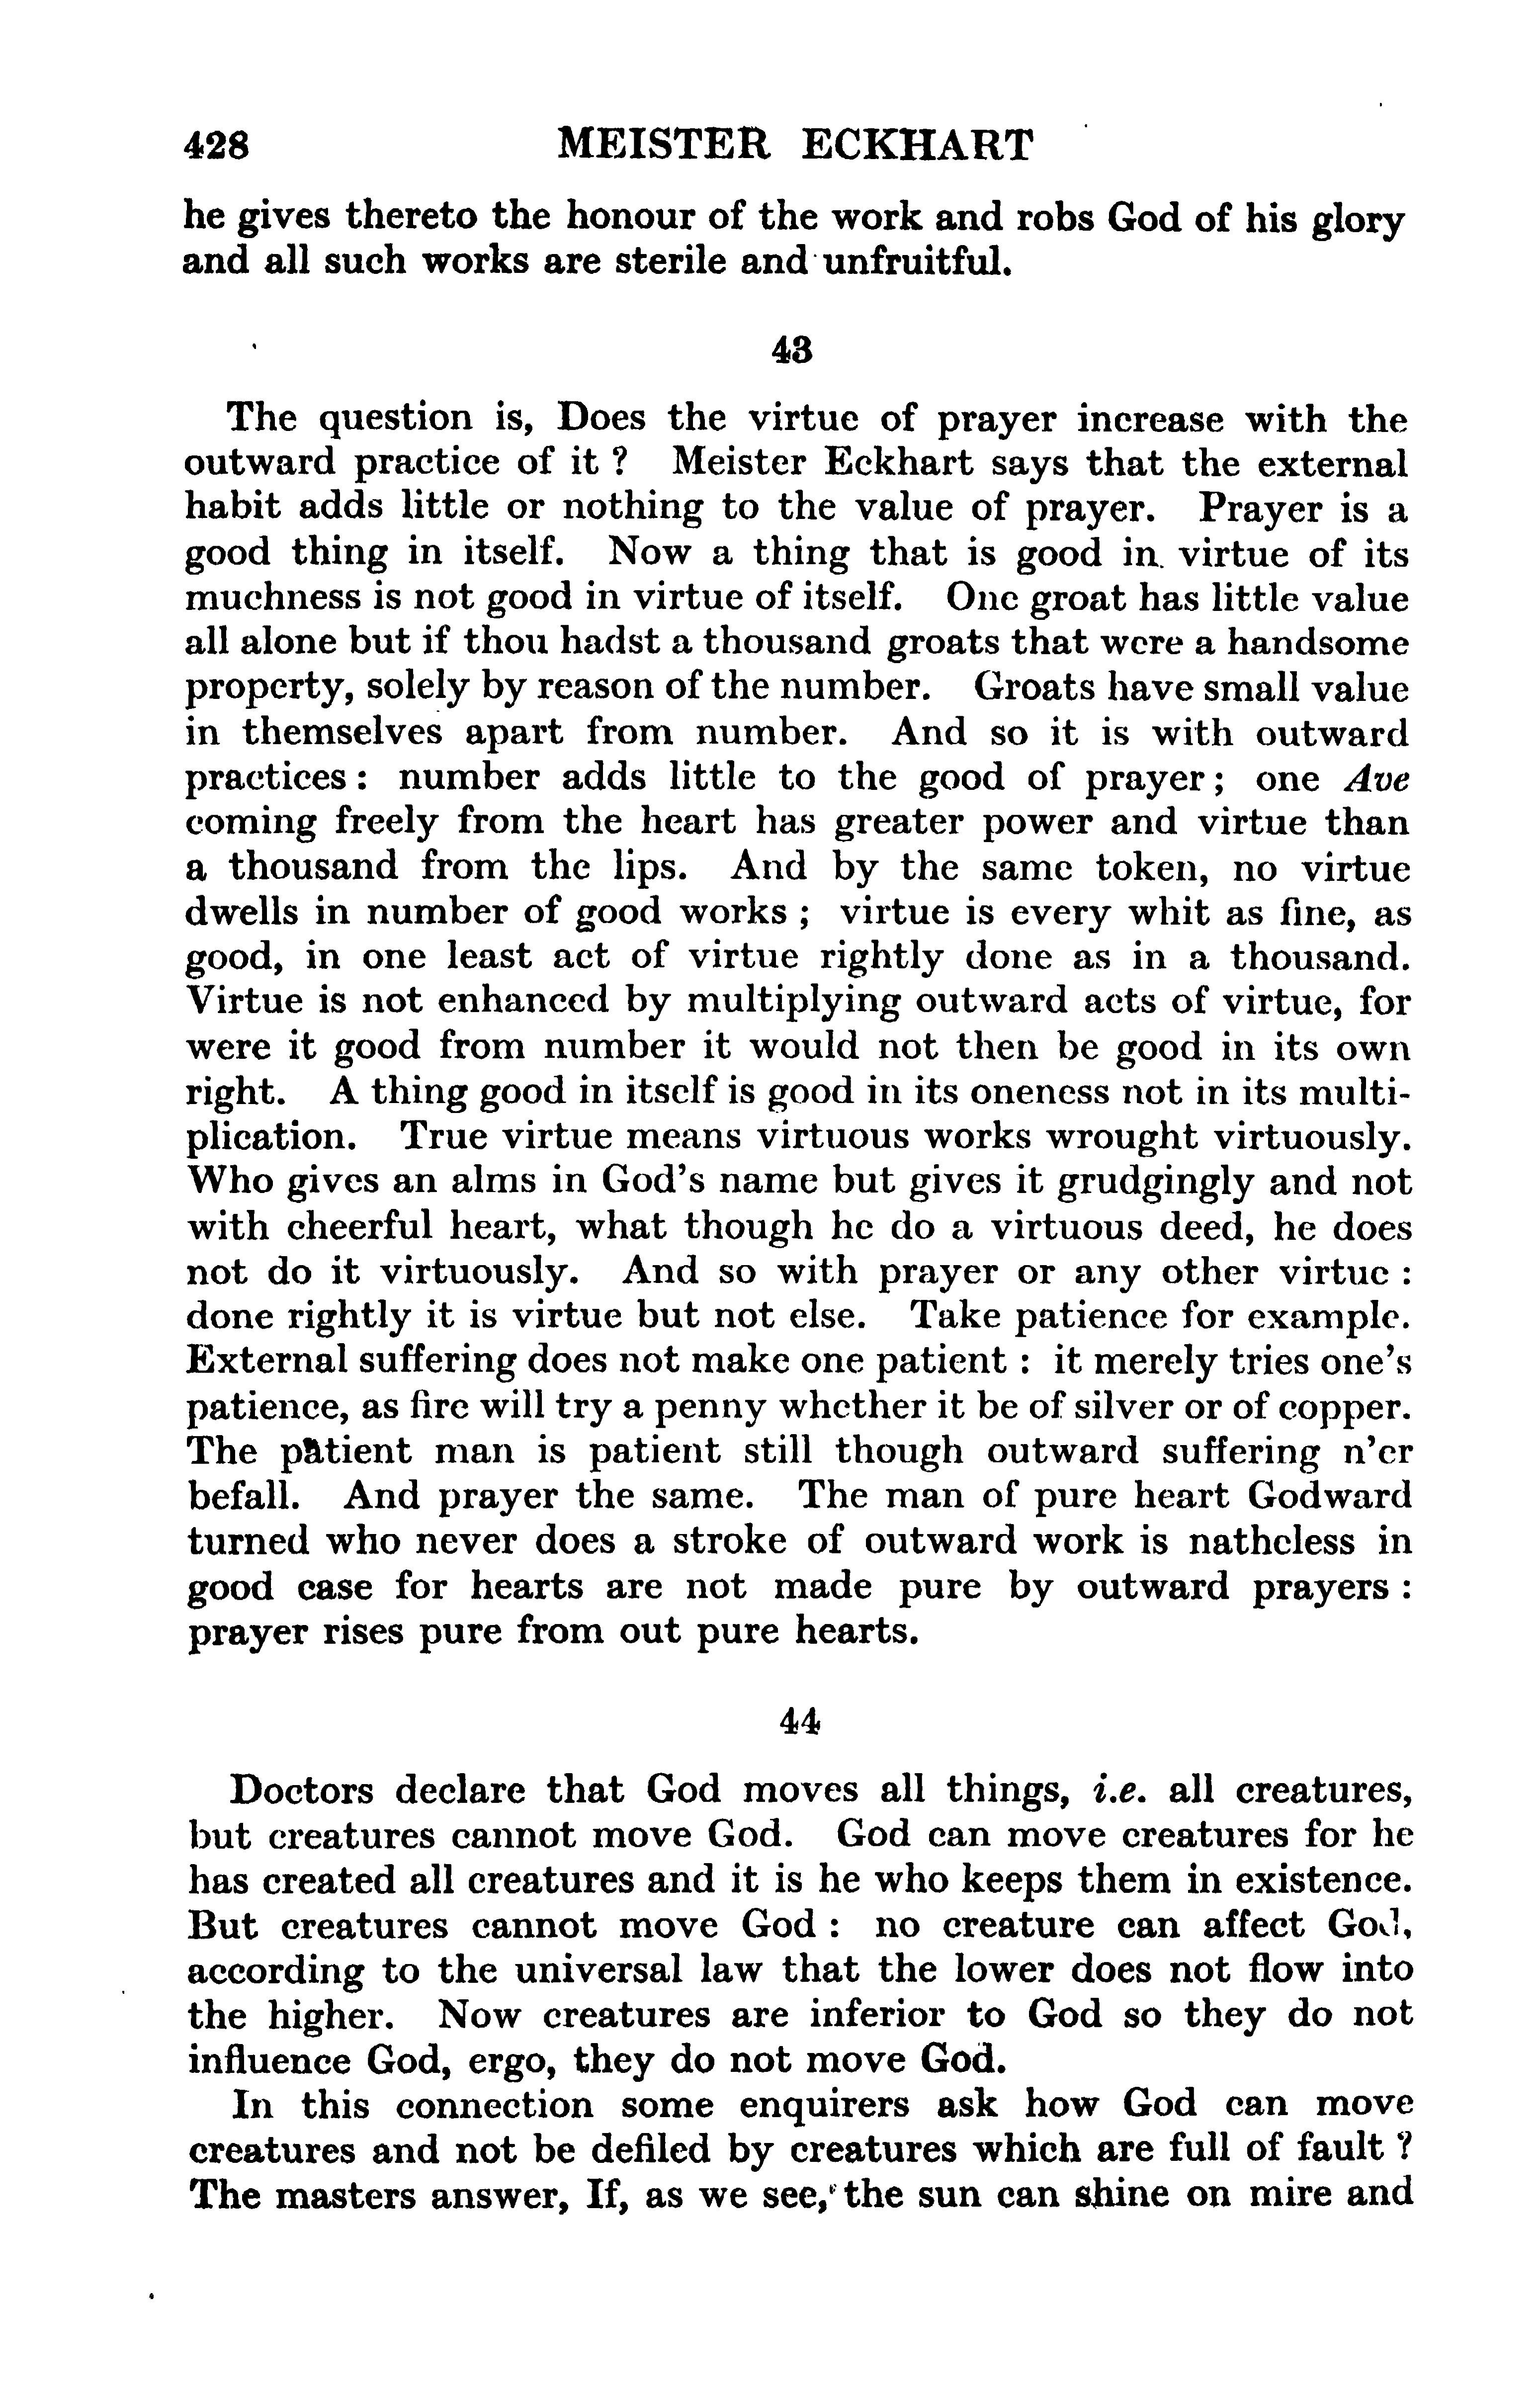 Image of page 0452